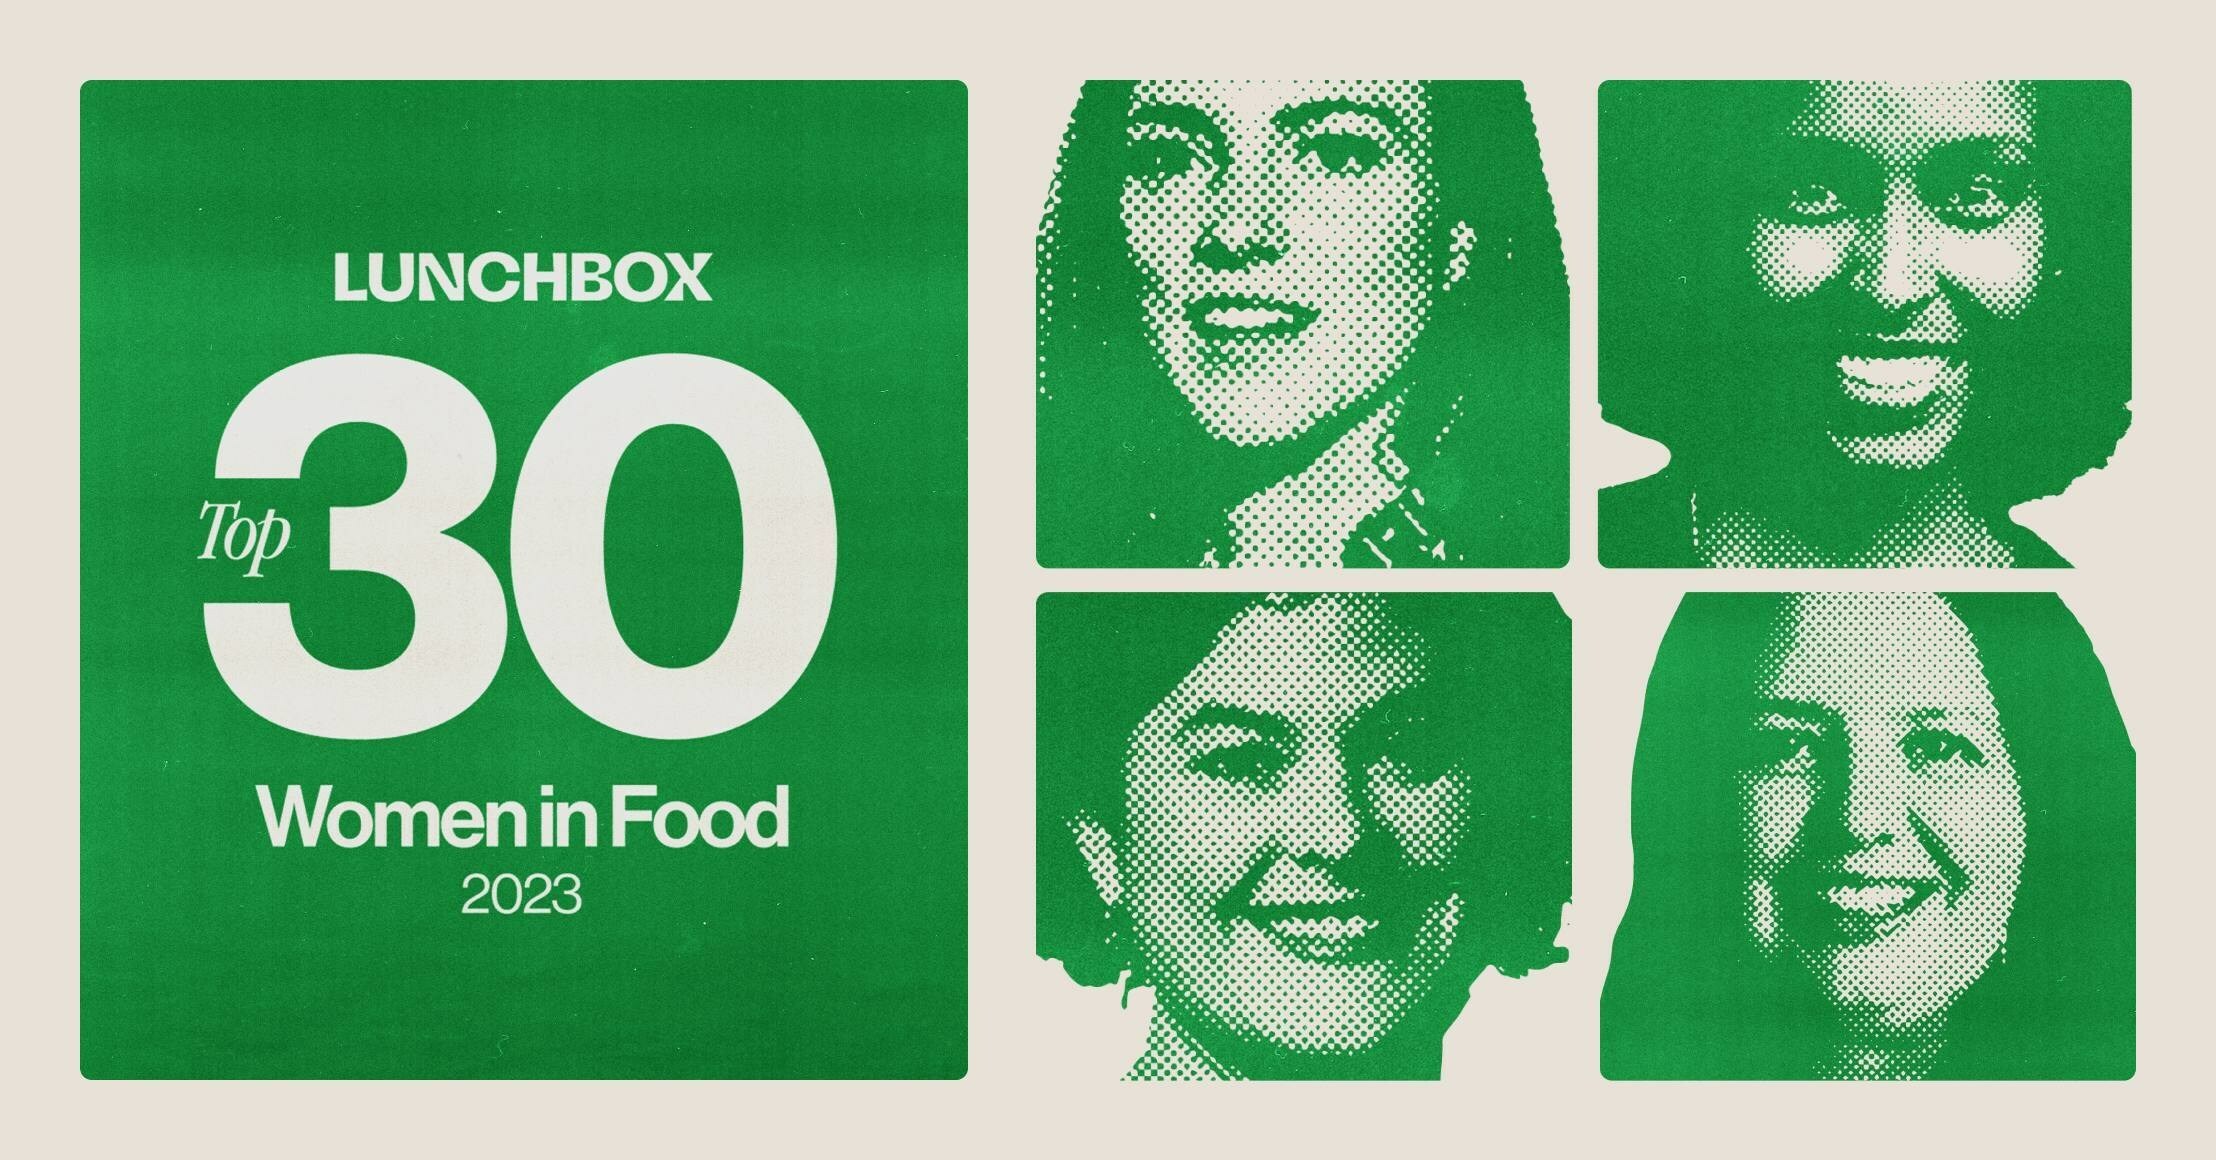 LUNCHBOX LAUNCHES THIS YEAR’S TOP 30 WOMEN IN FOOD LIST, HIGHLIGHTING THE MUST-WATCH INDUSTRY LEADERS